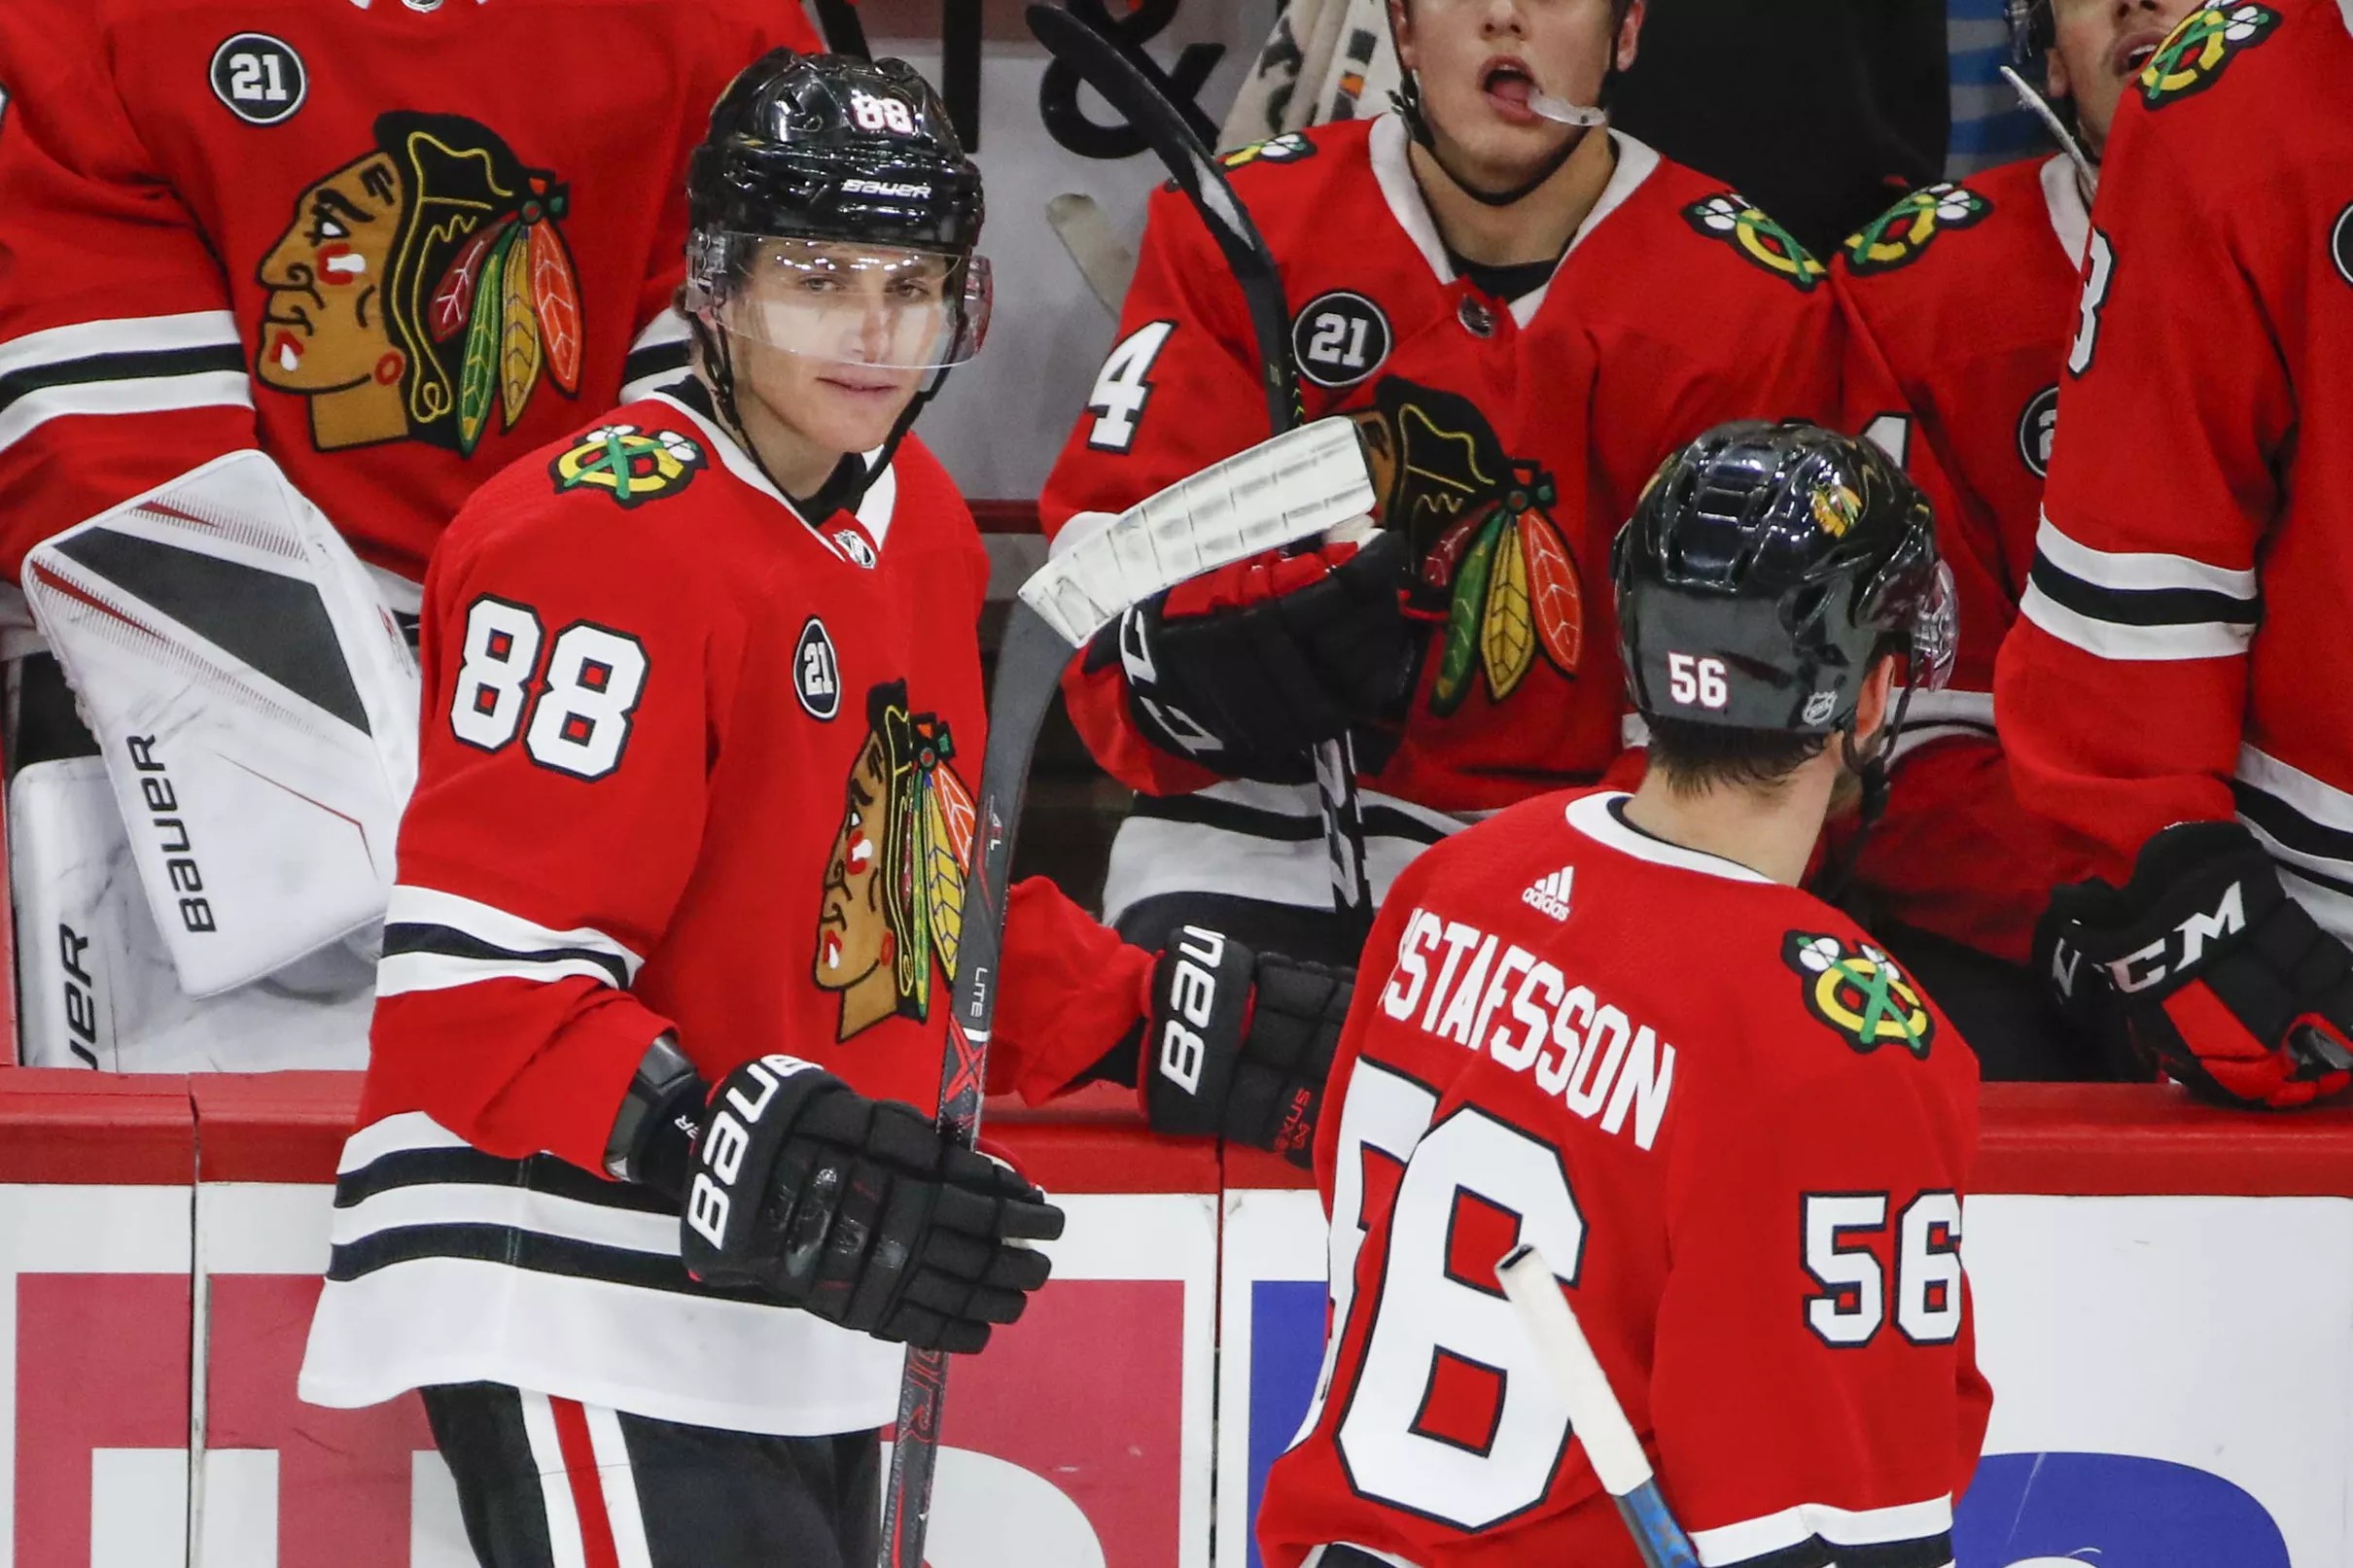 Stock Report: 3 up, 3 down from Blackhawks’ 4-1 victory over Rangers